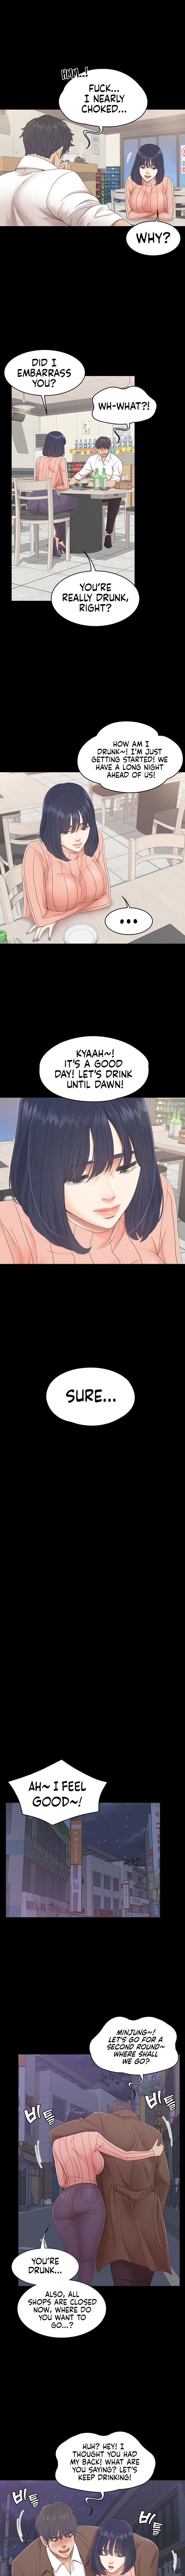 stuck-in-time-chap-3-5